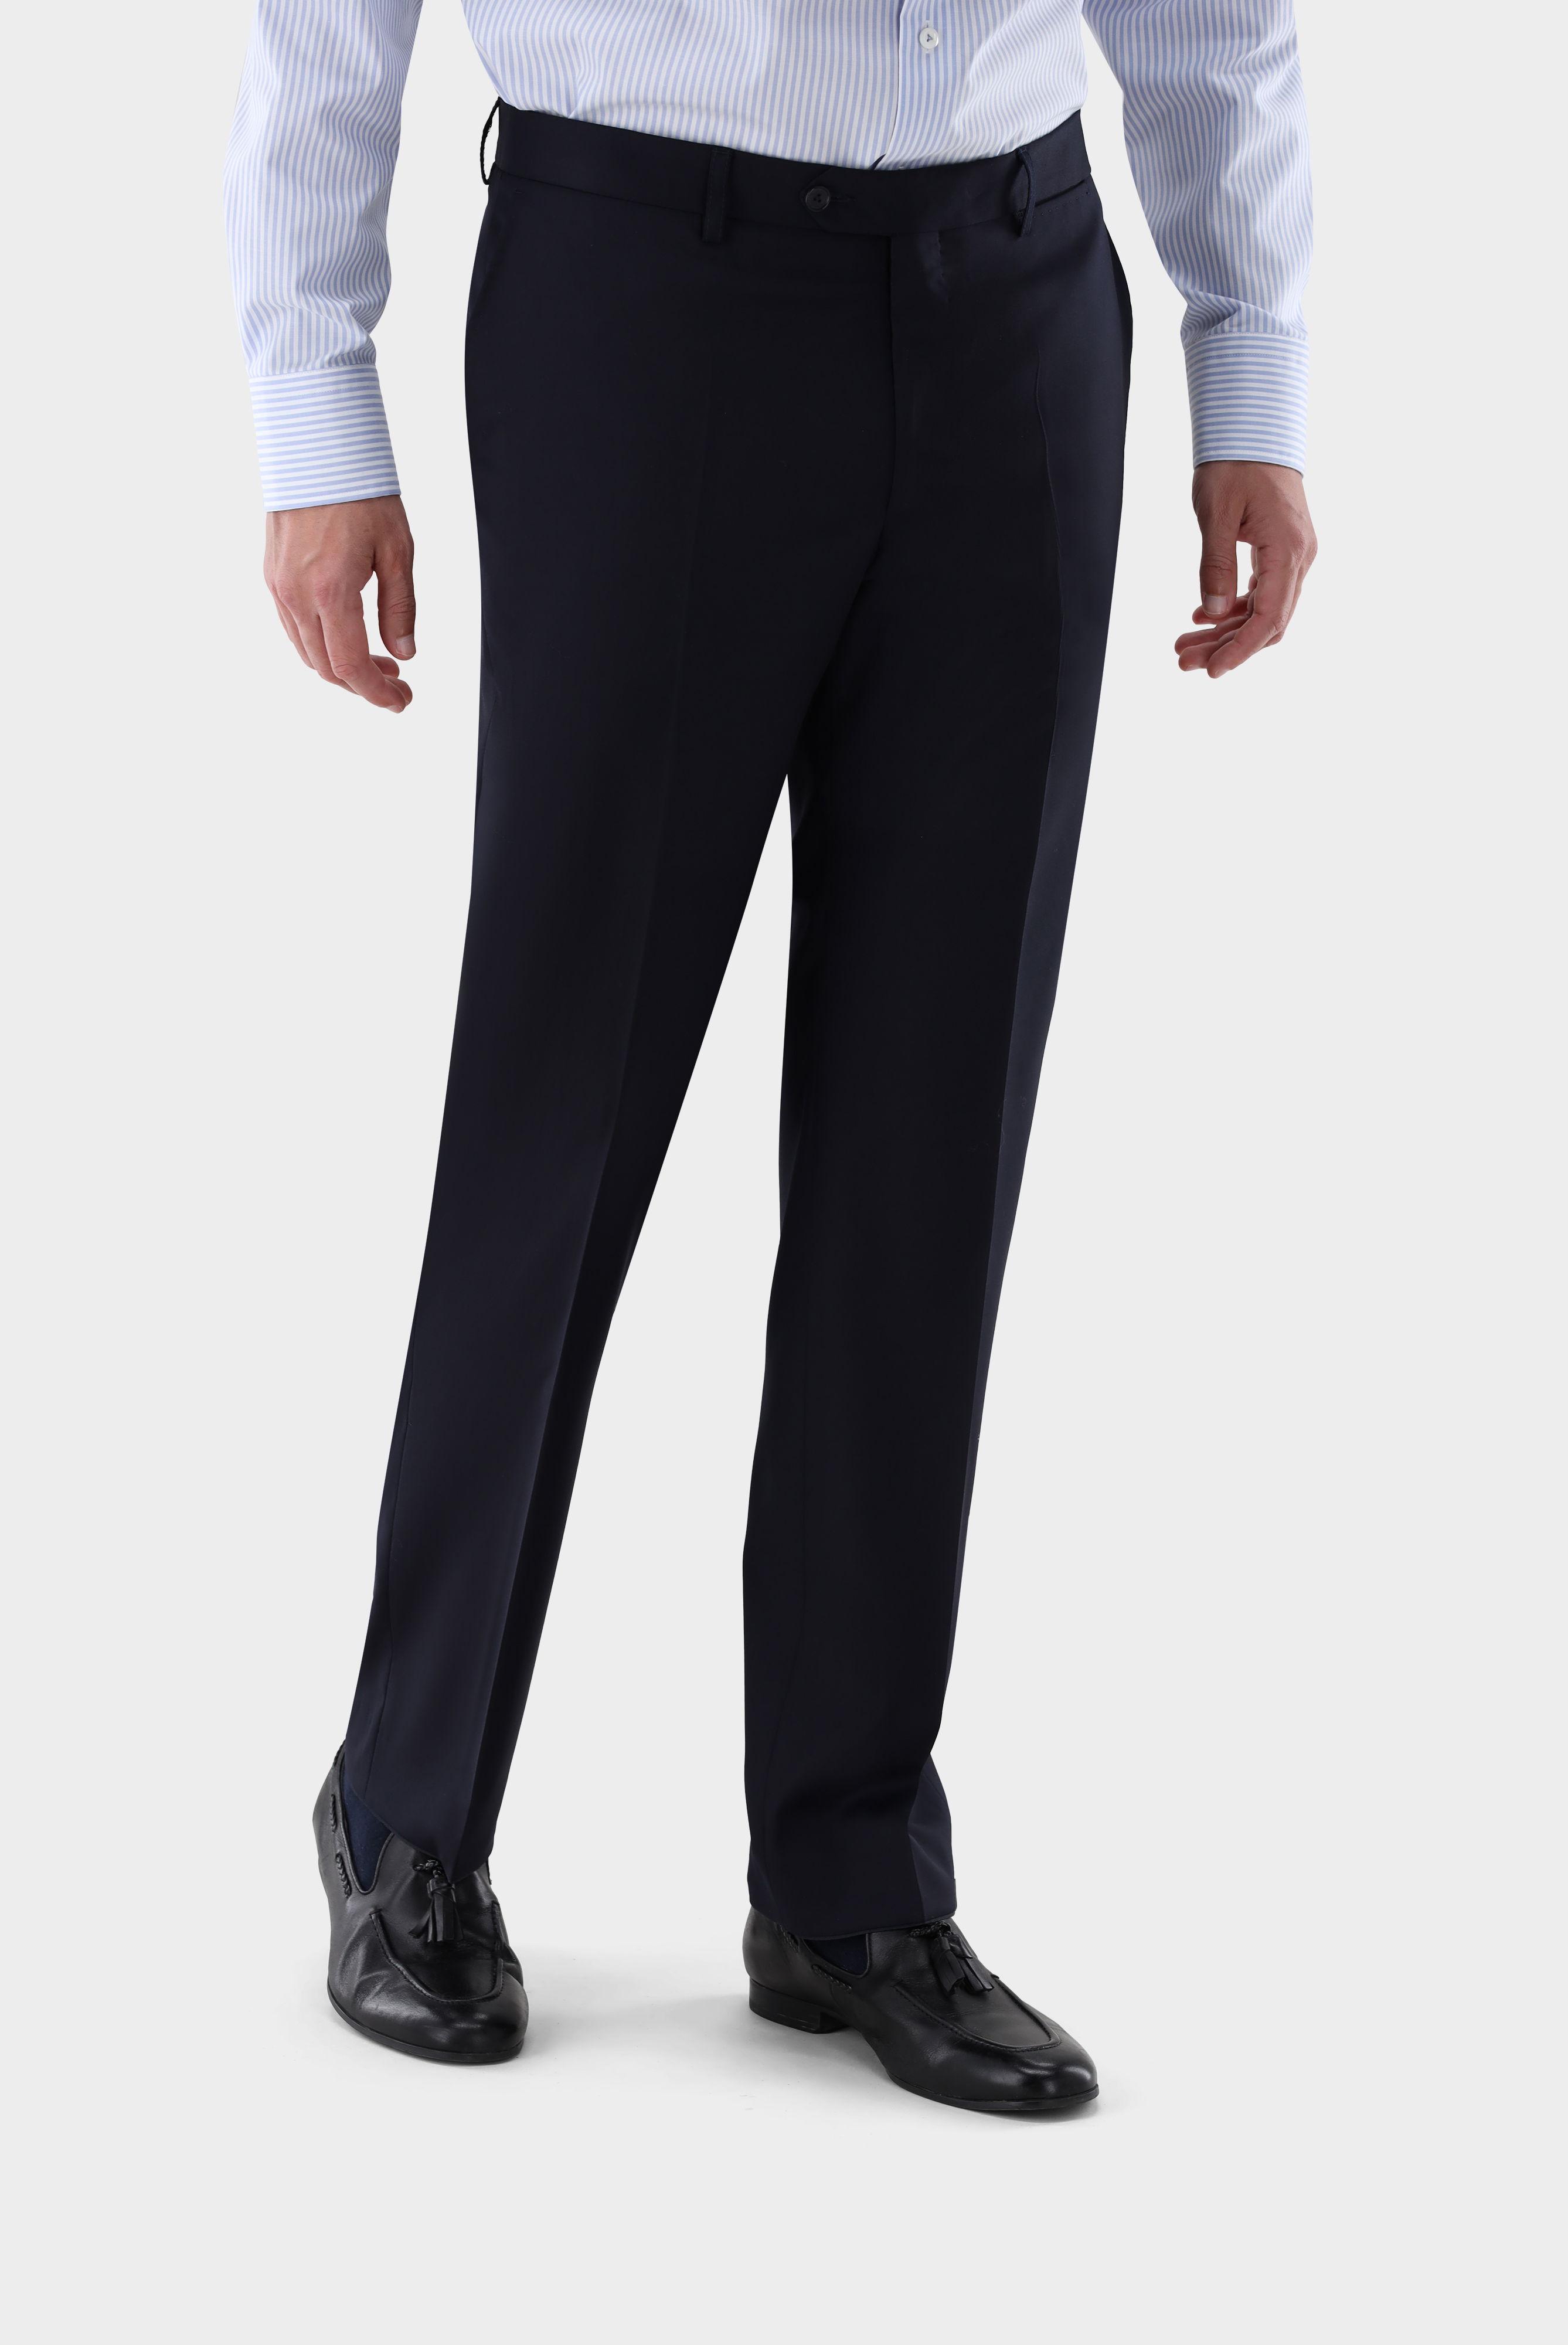 Jeans & Trousers+Men''s pants made of merino wool+80.7804.16.H01000.780.52